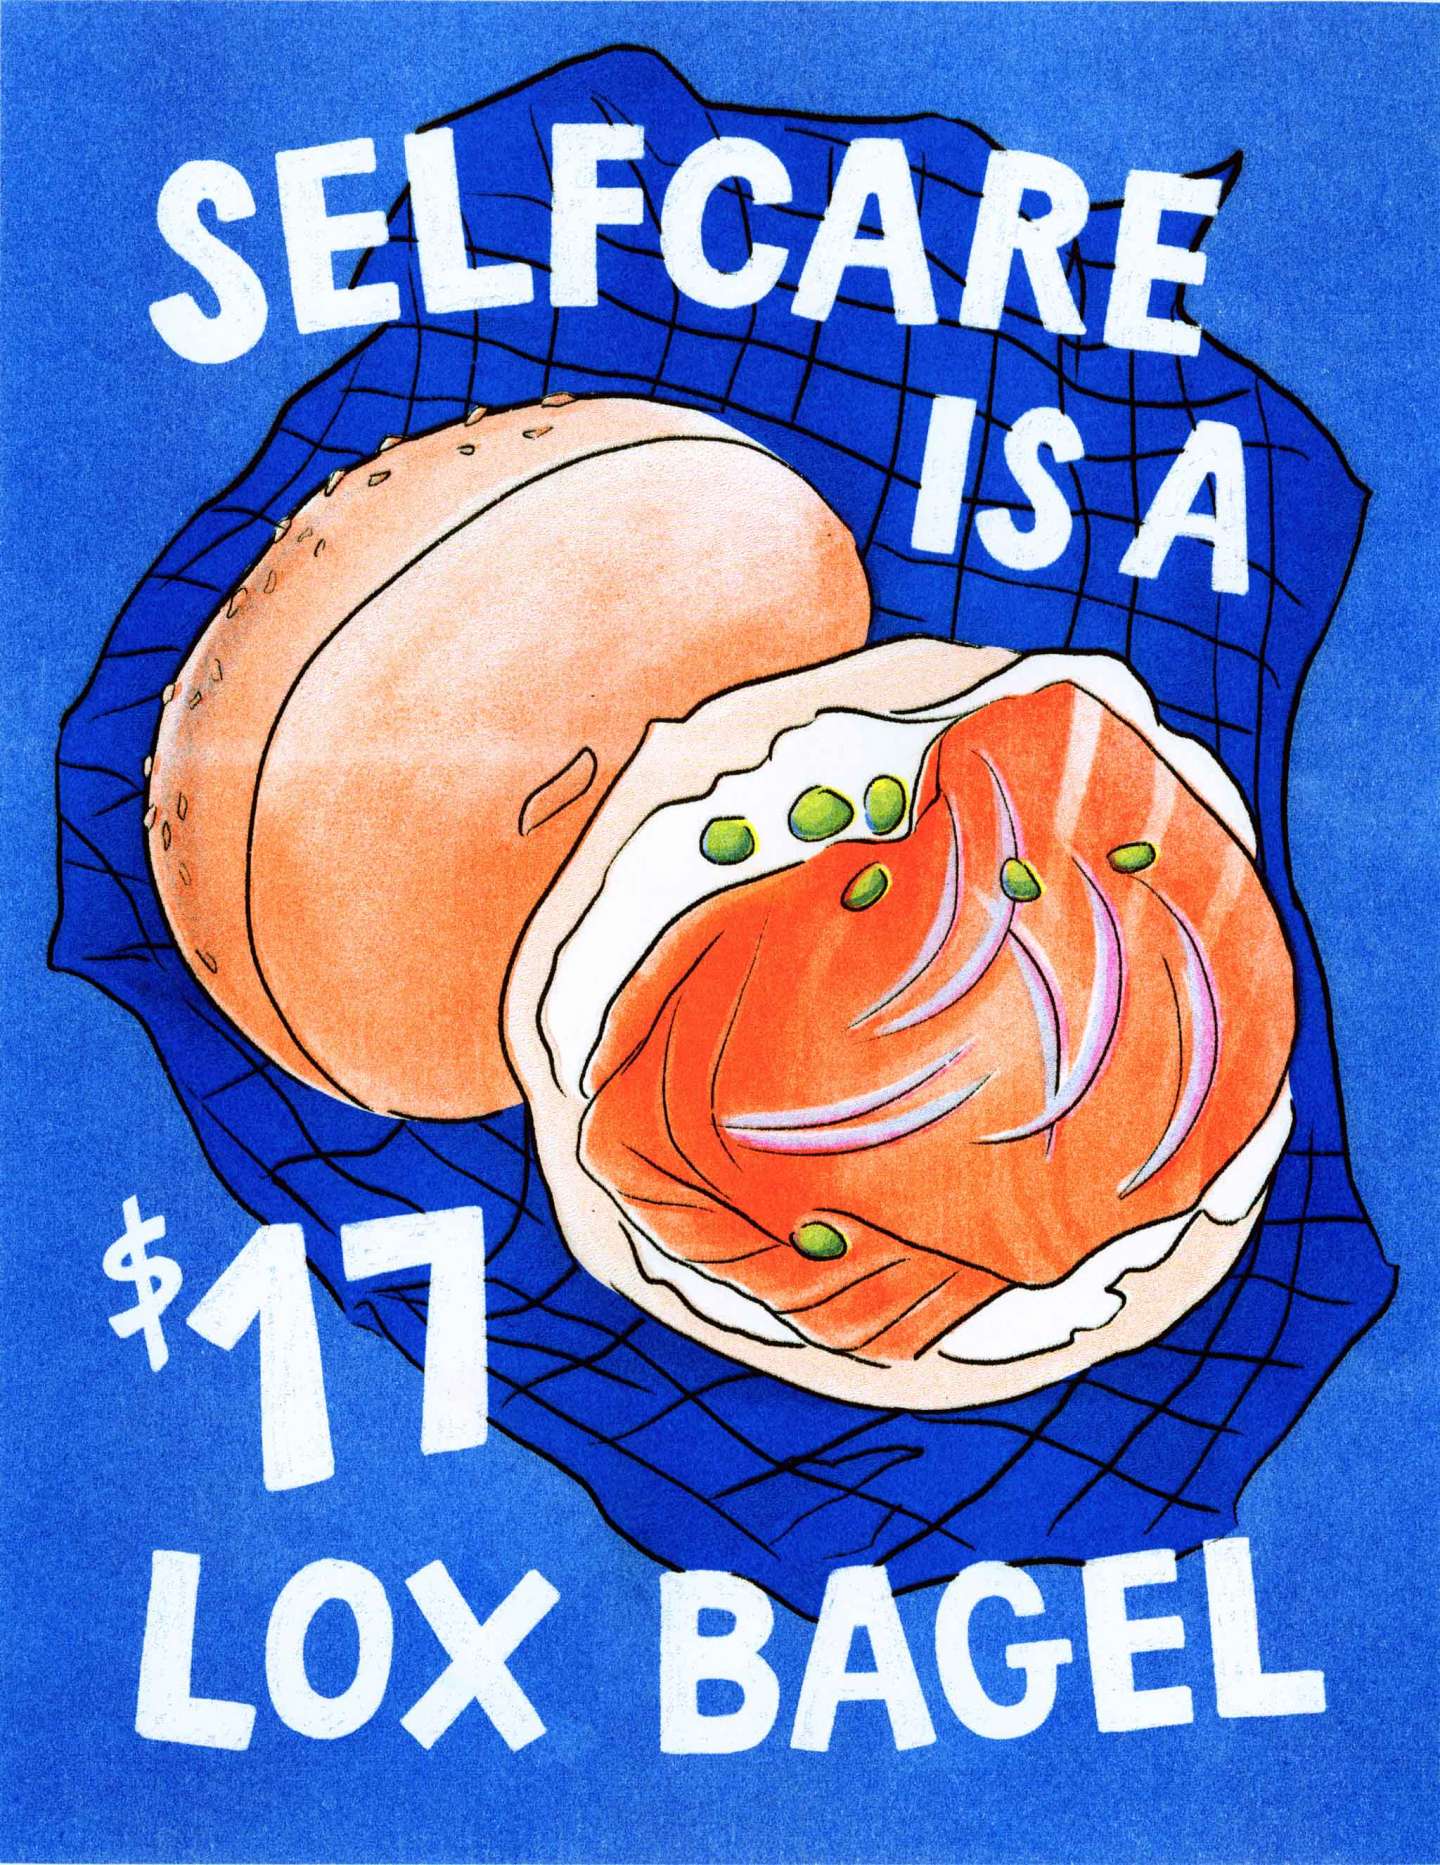 Selfcare is a $17 Lox Bagel